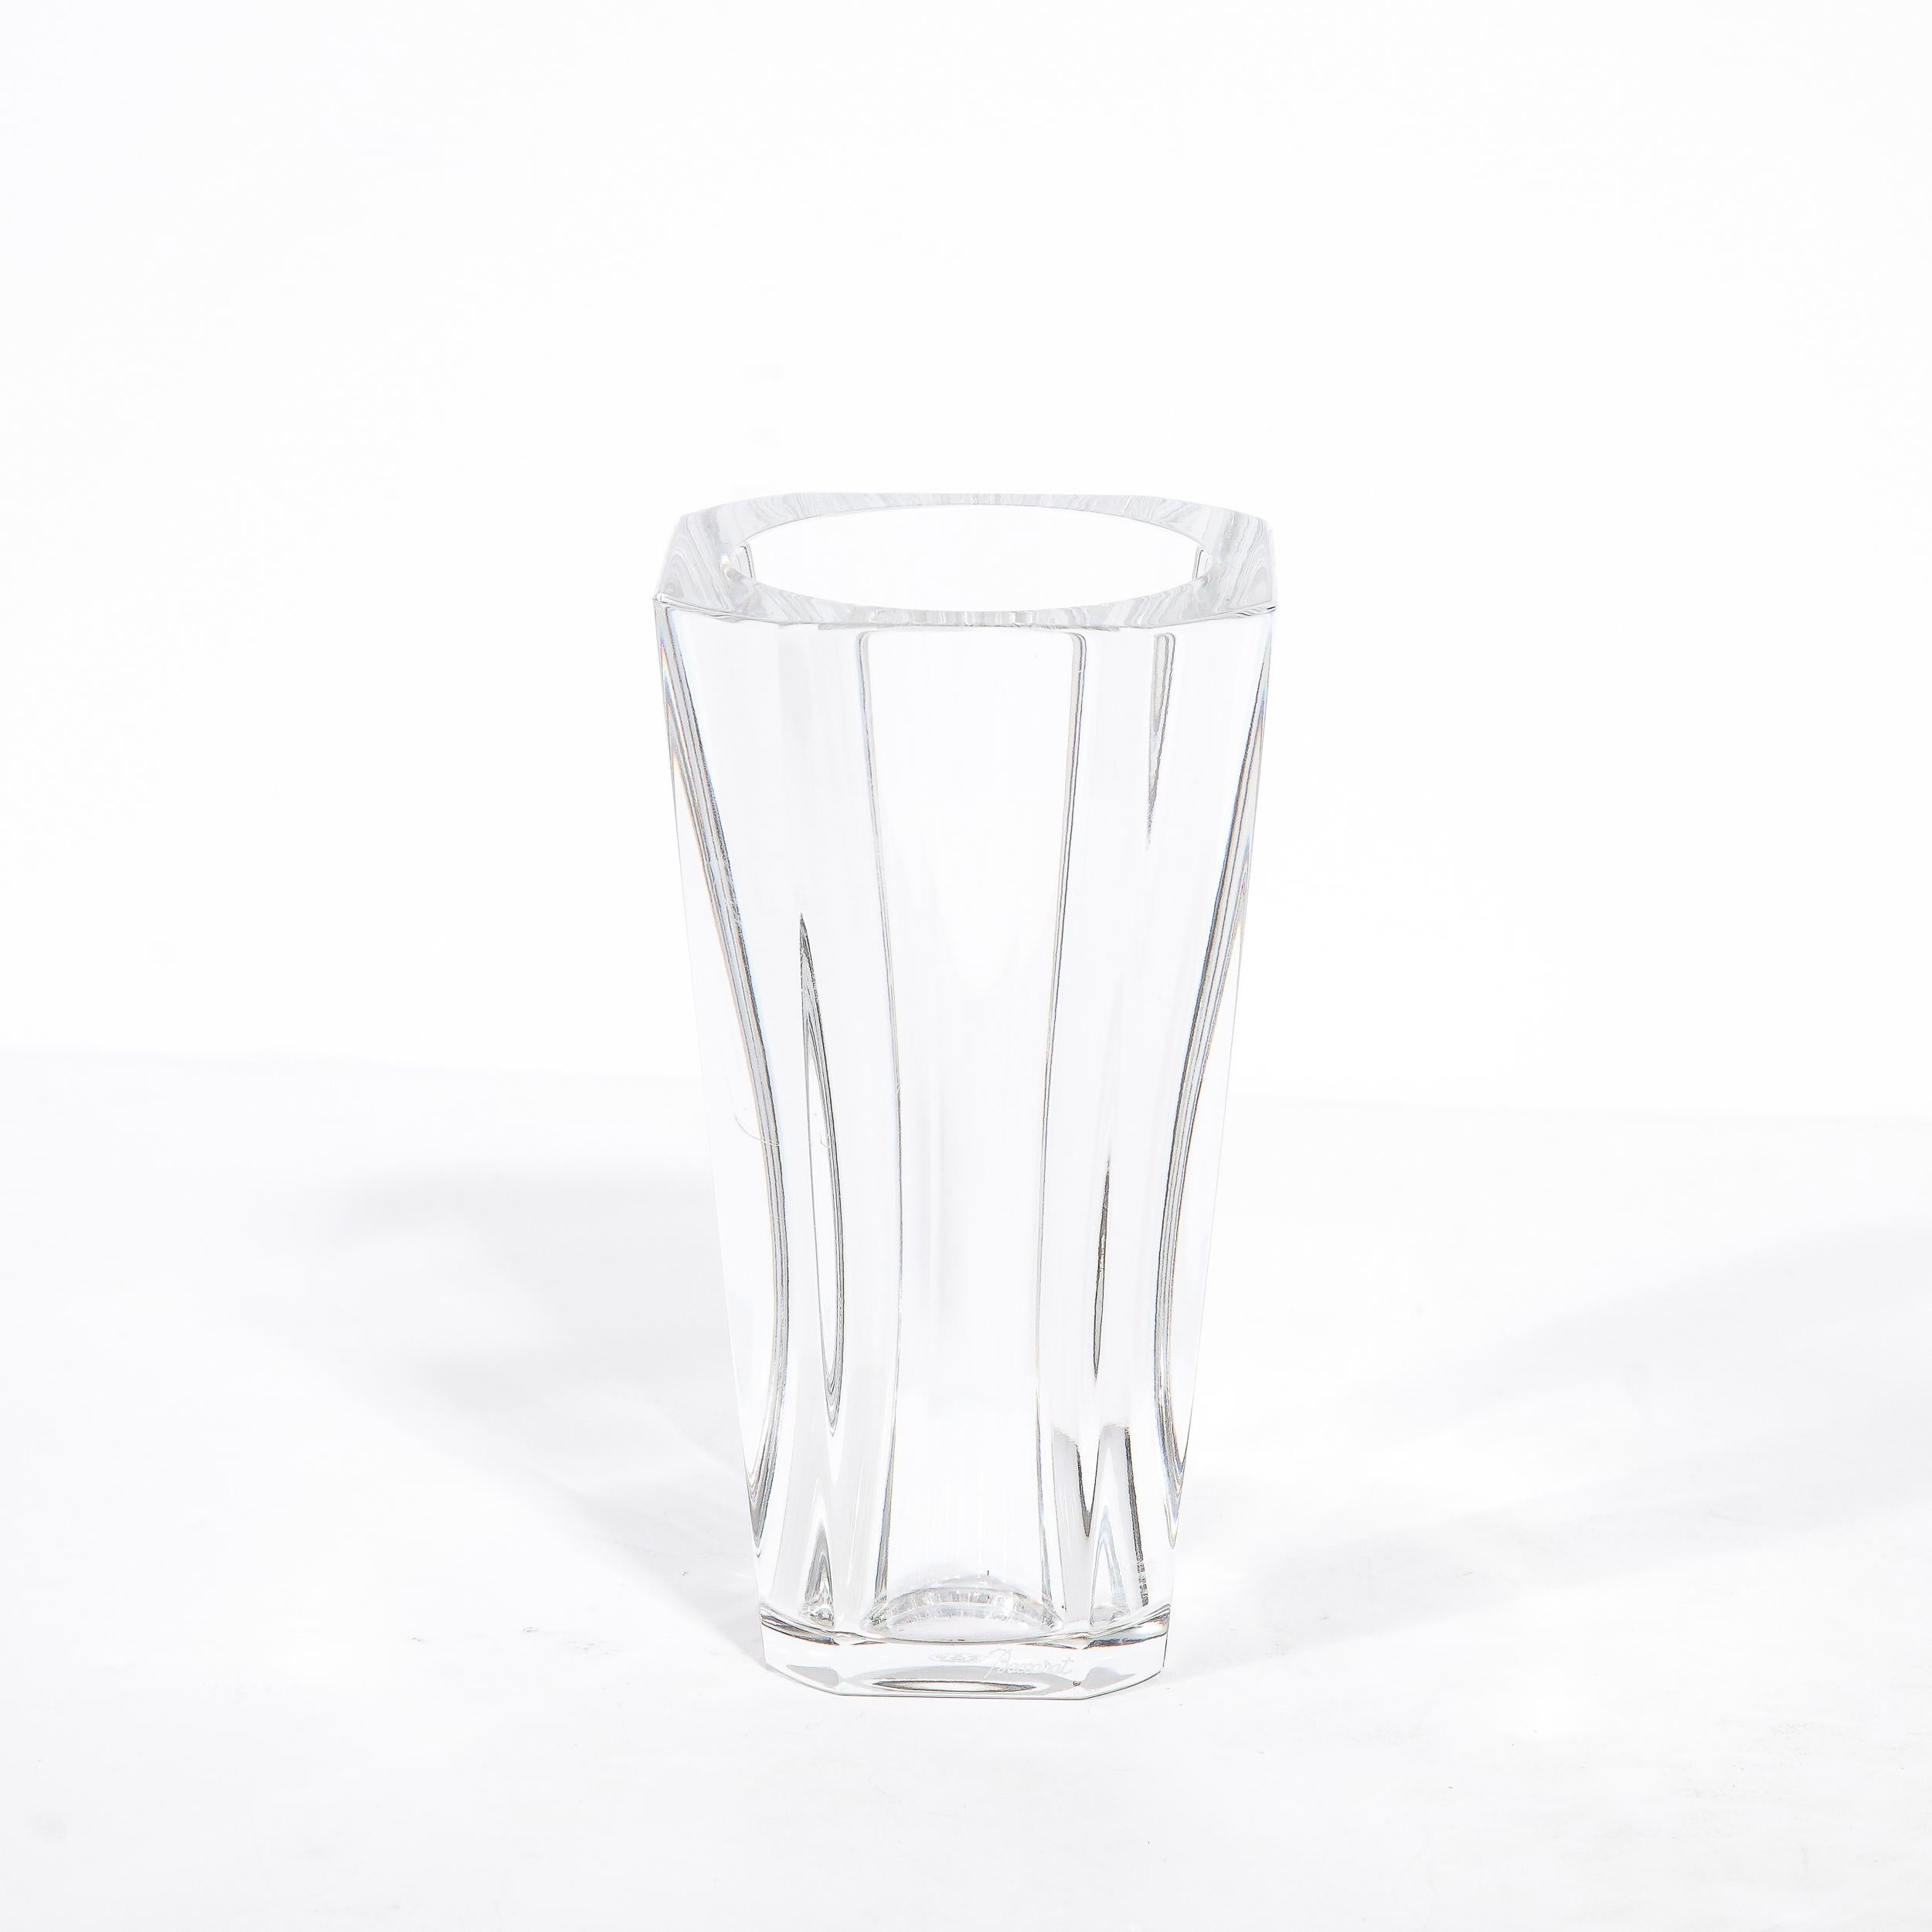 This stunning modernist vase was realized by Baccarat- one of the world's premiere makers of crystal products since 1865. The piece features a slightly rounded, cylindrical body that flares subtly at top and bottom creating a subtle hour glass form.